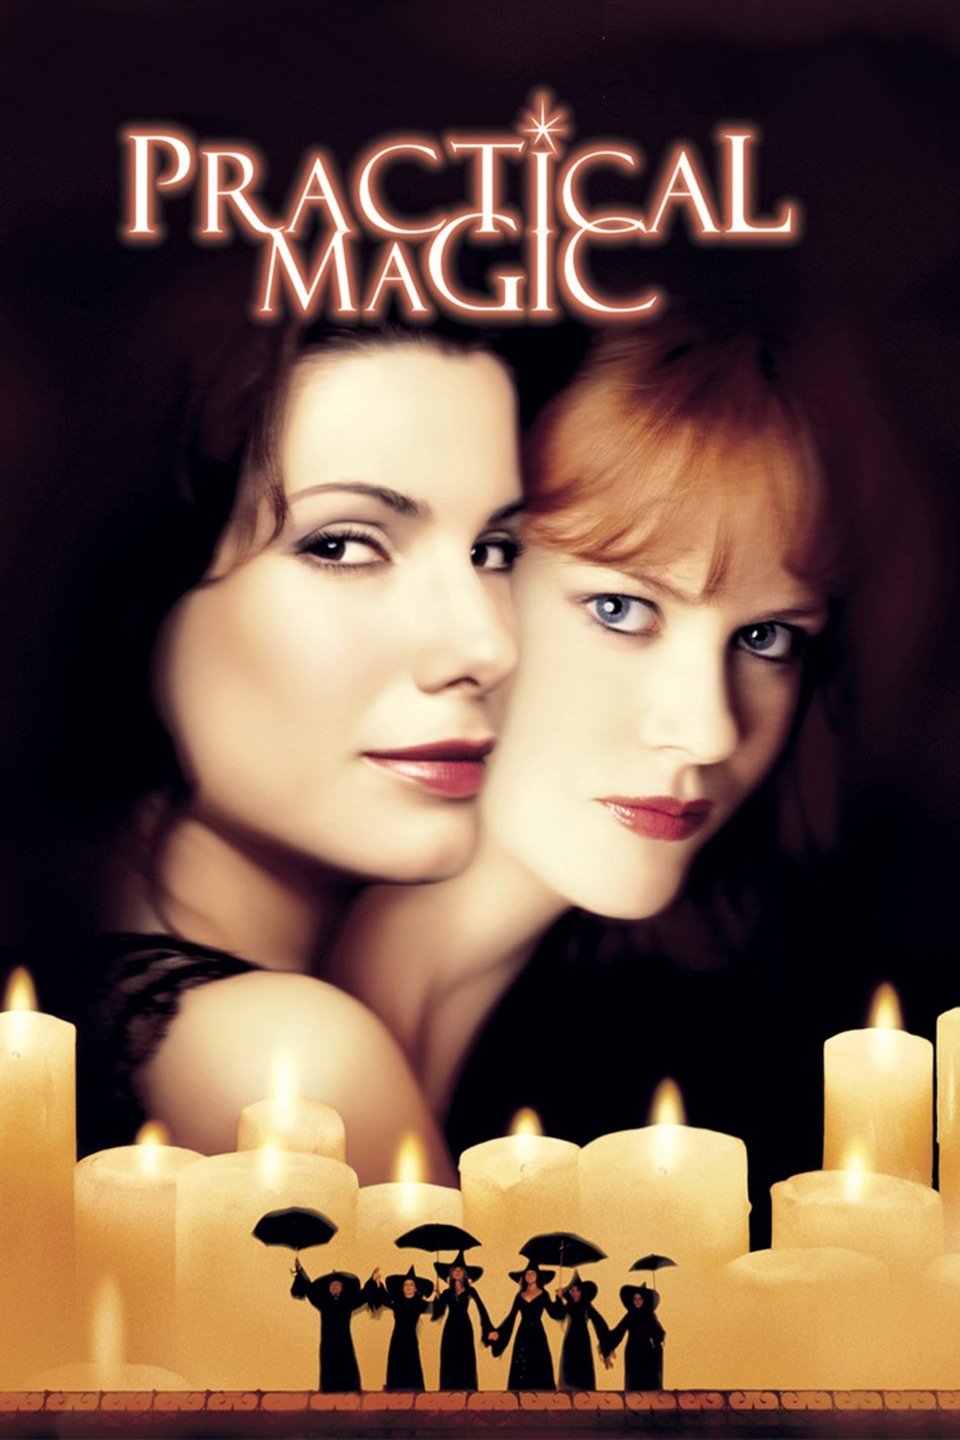 Movie poster for Practical Magic featuring the faces of actors Sandra Bullock and Nicole Kidman, who play Sally and Gillian Owens respectively. Below the two faces is a row of lit candles. Shrunk down in size and superimposed on top of the candles are four adult and two child witches dressed in black and holding umbrellas.